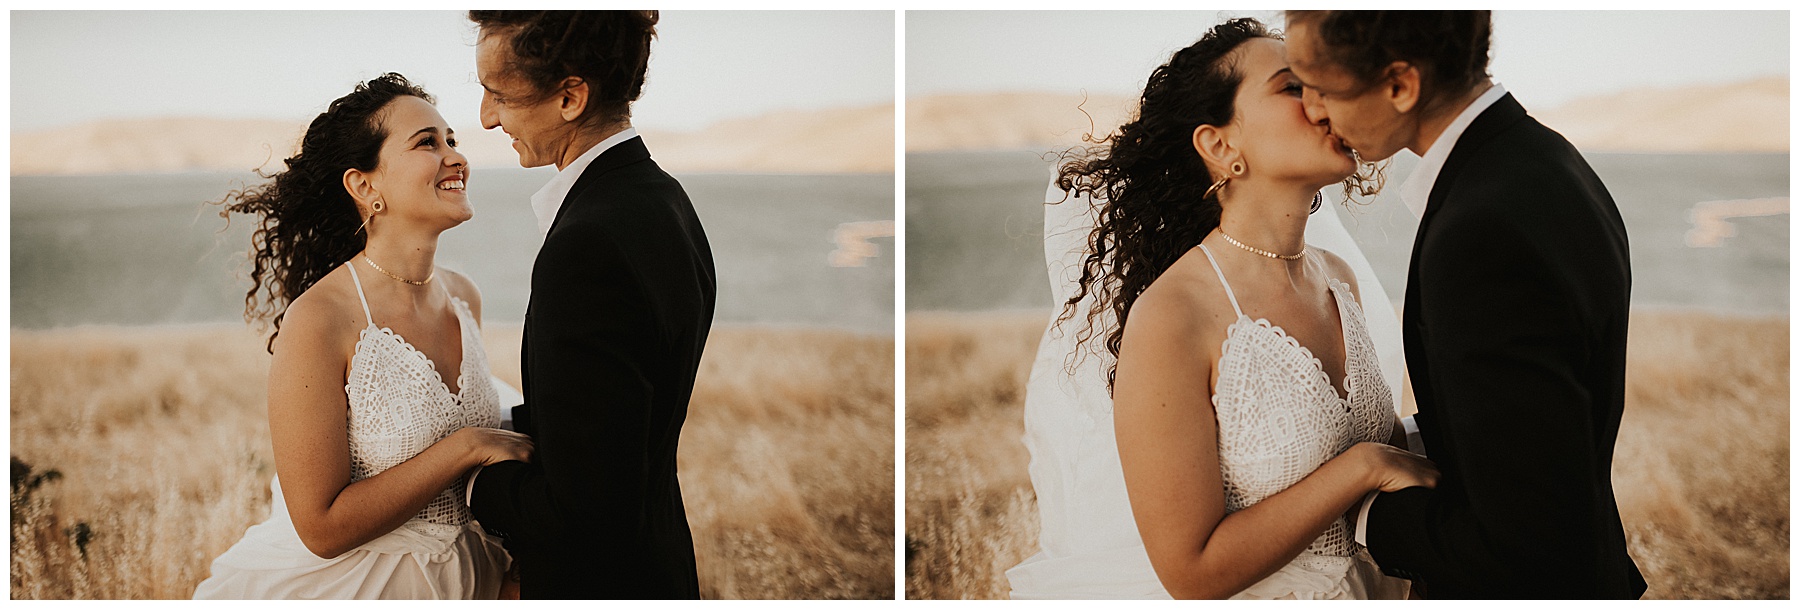 Giselle and Andre’s sunset bohemian California elopement - Photographed by Juju Photography - California and destination wedding photographer